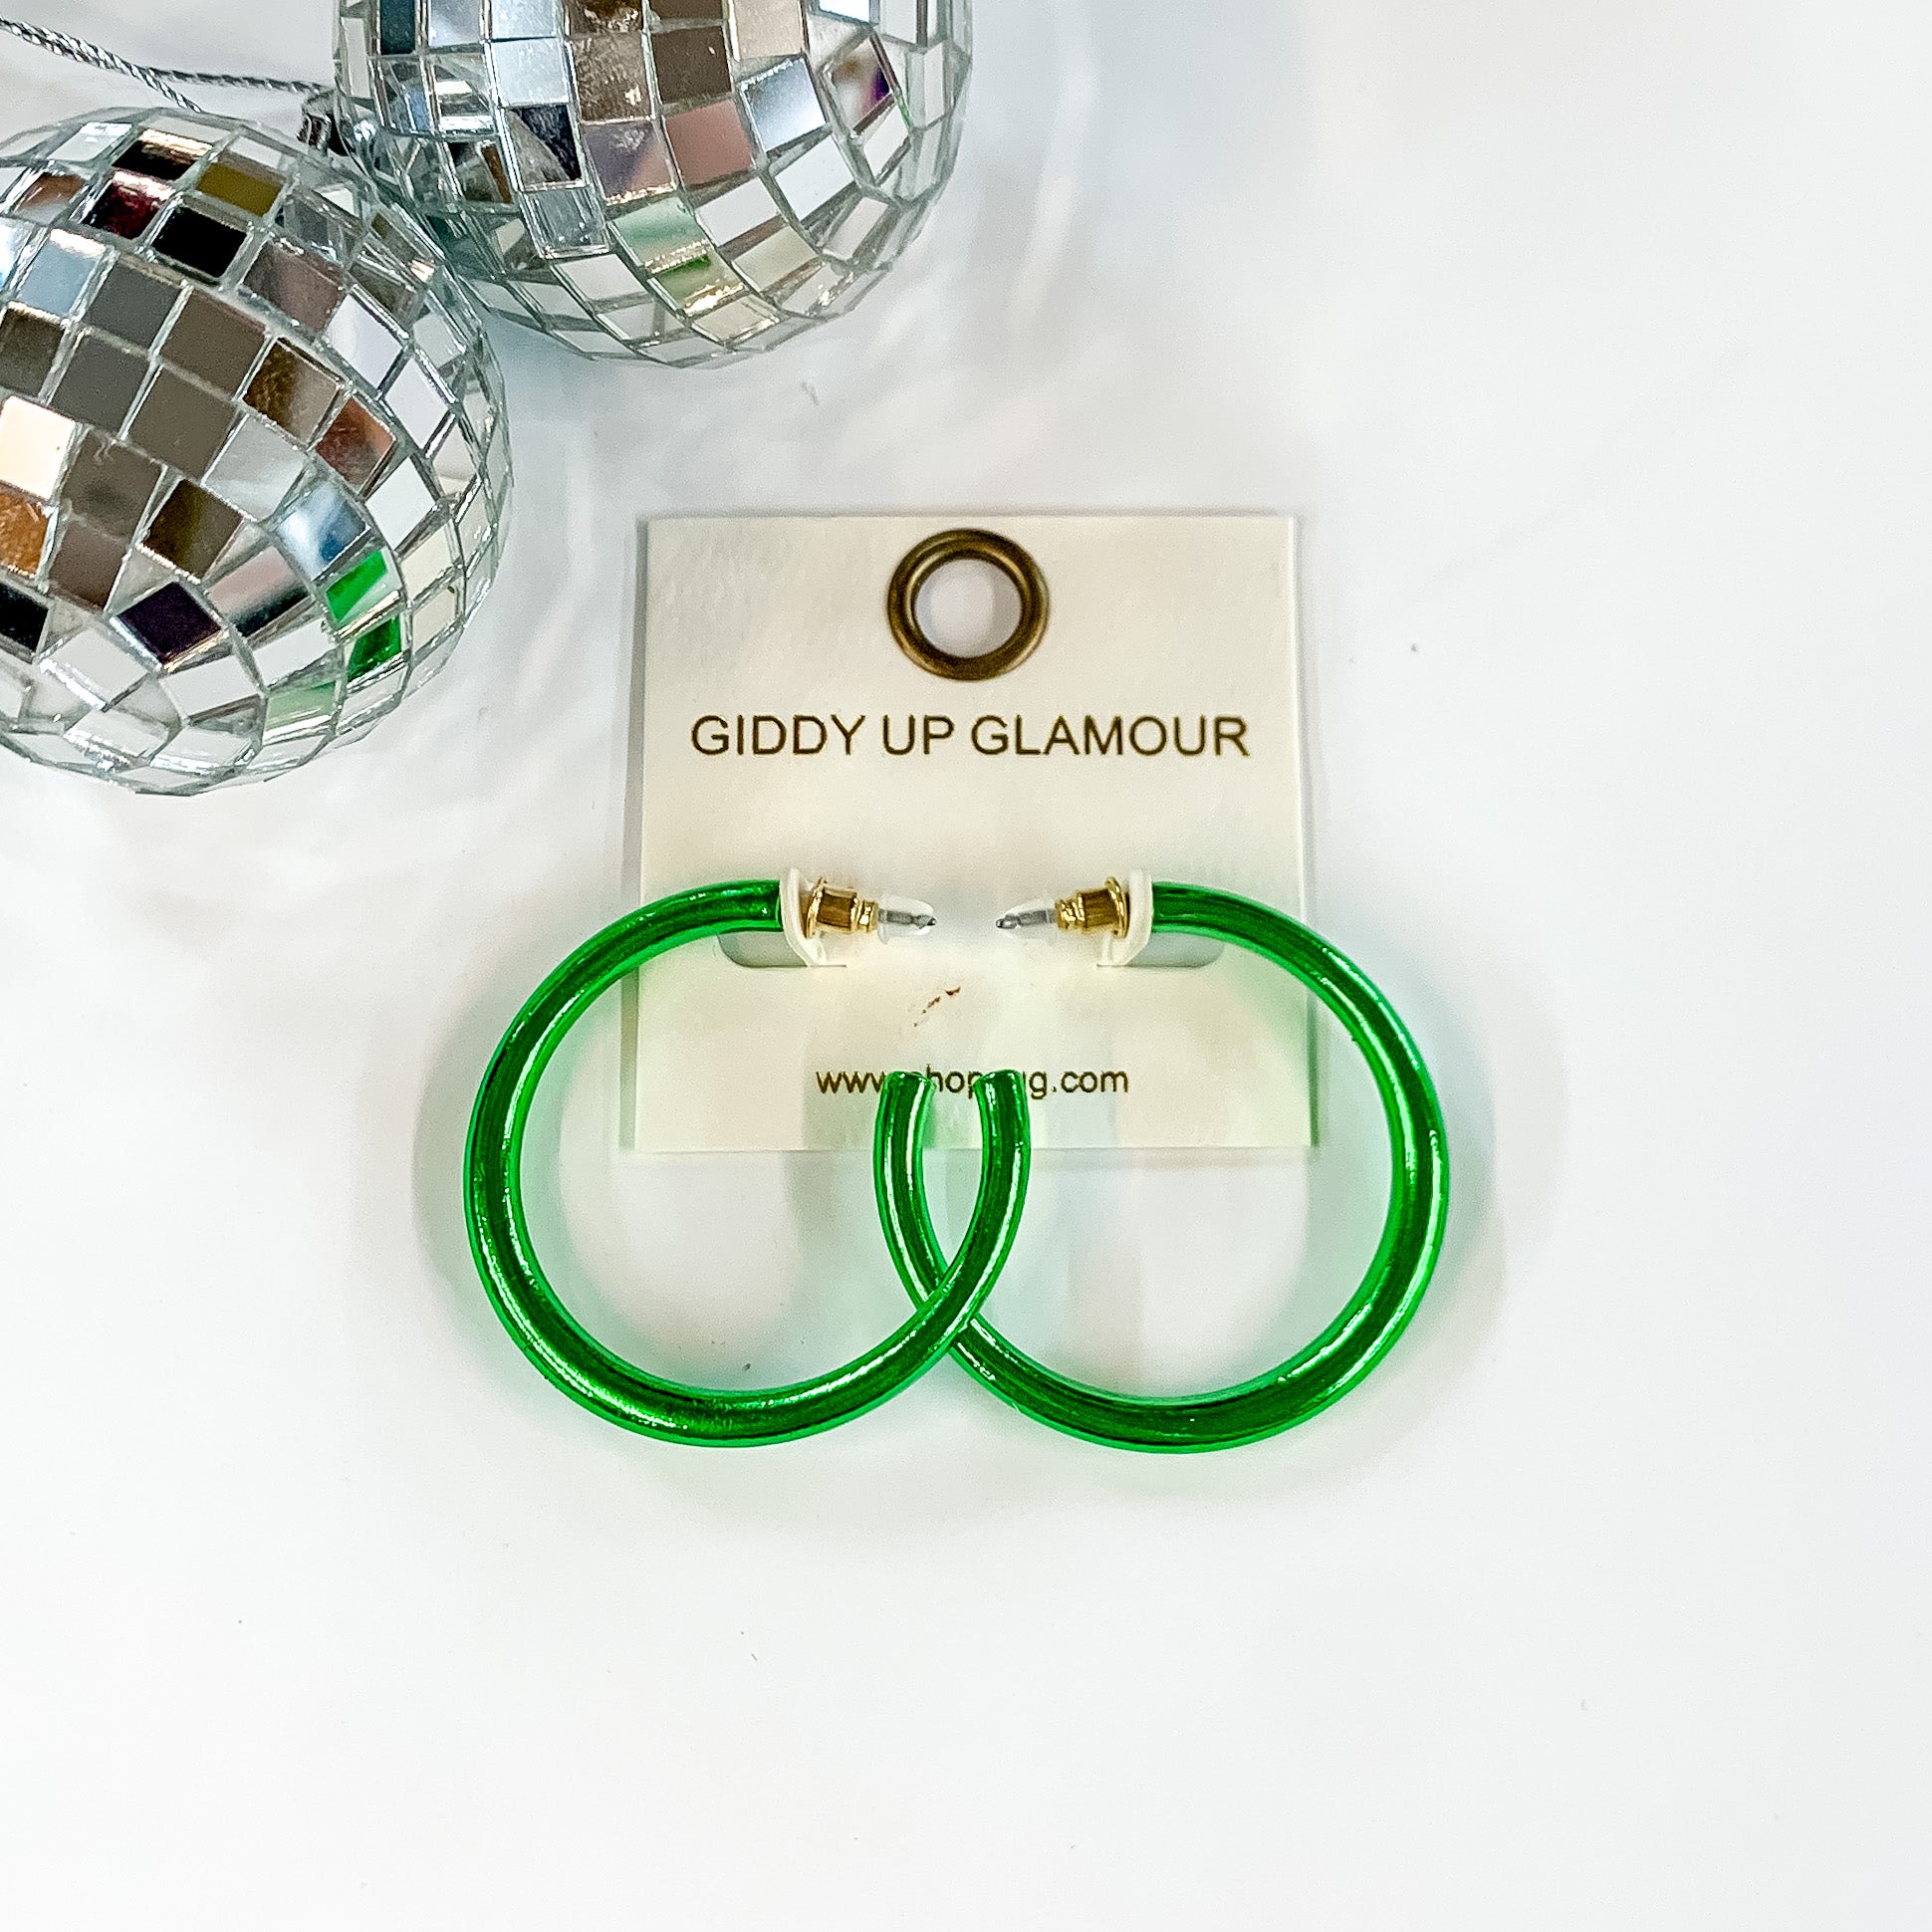 Light Up Medium Neon Hoop Earrings In Green. Pictured on a white background with disco balls in the top left corner.